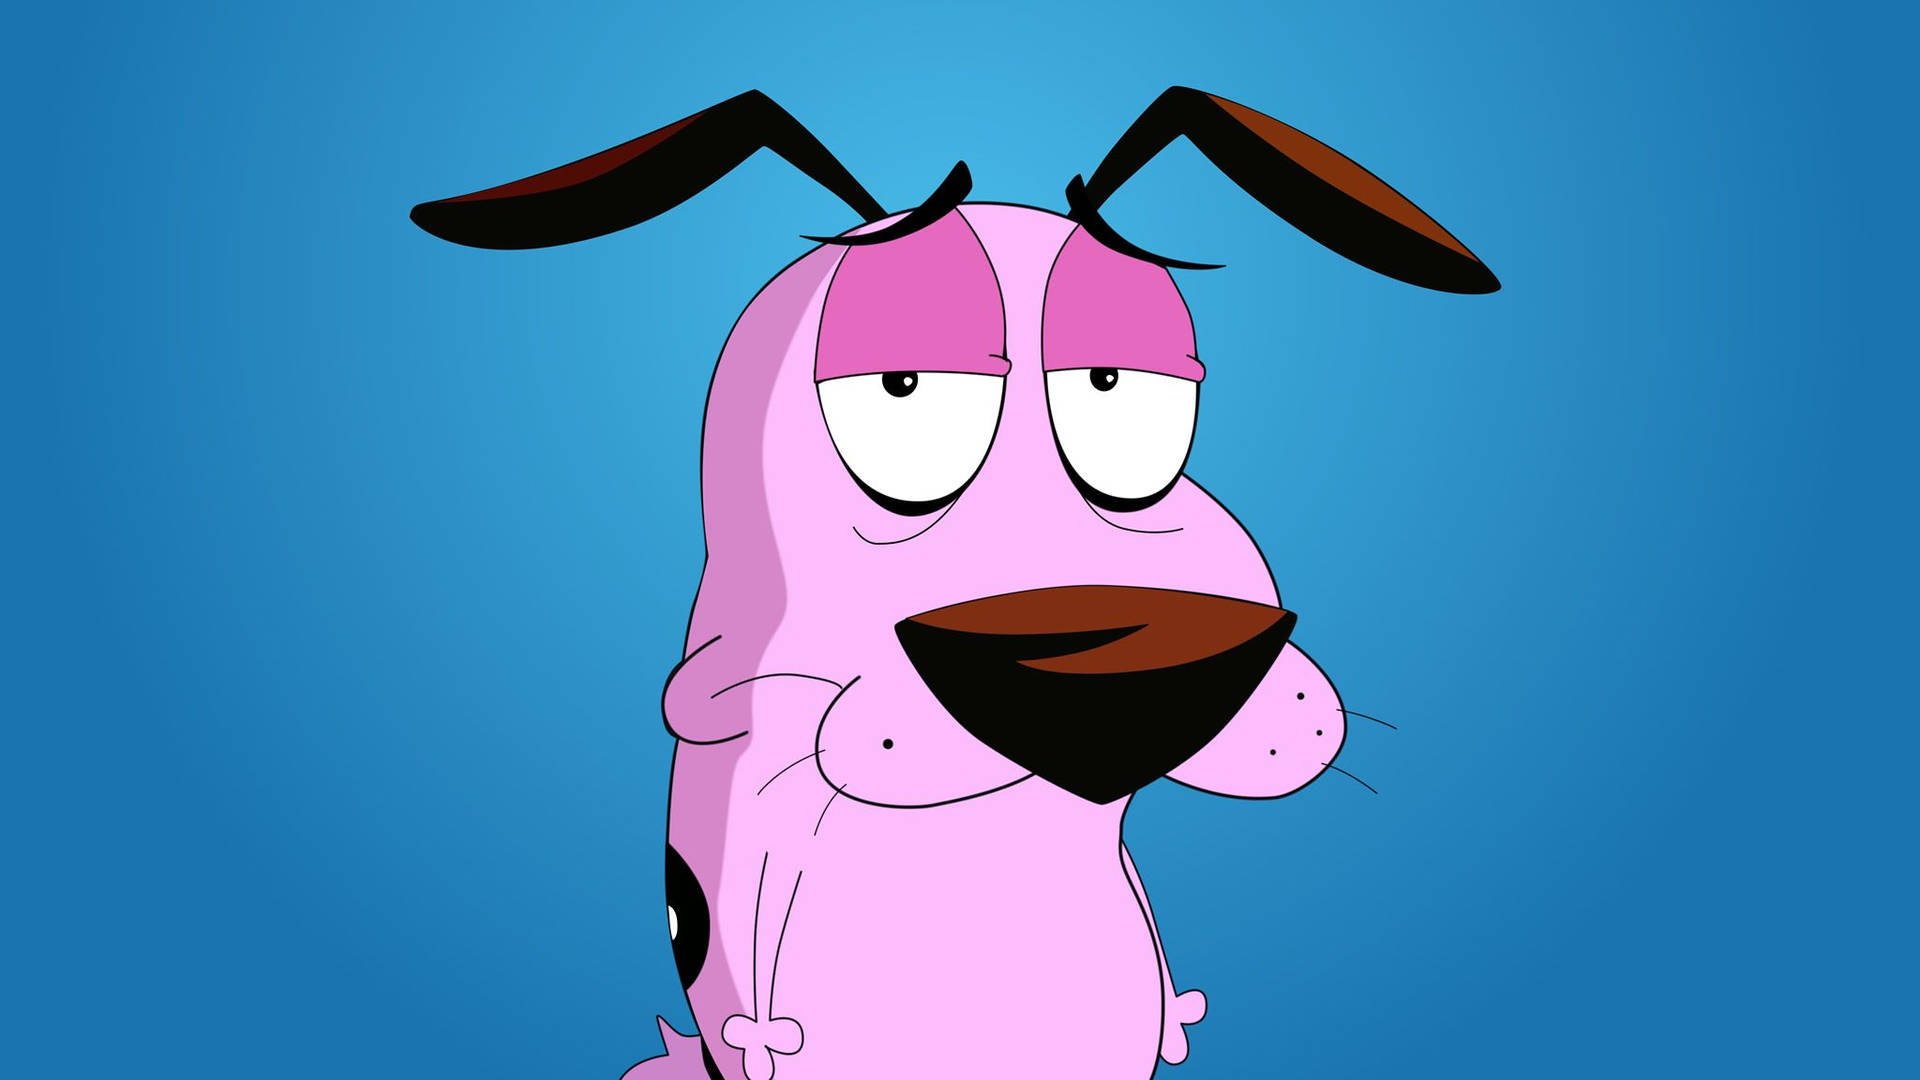 Cartoon Courage the Cowardly Dog blue background wallpaper.